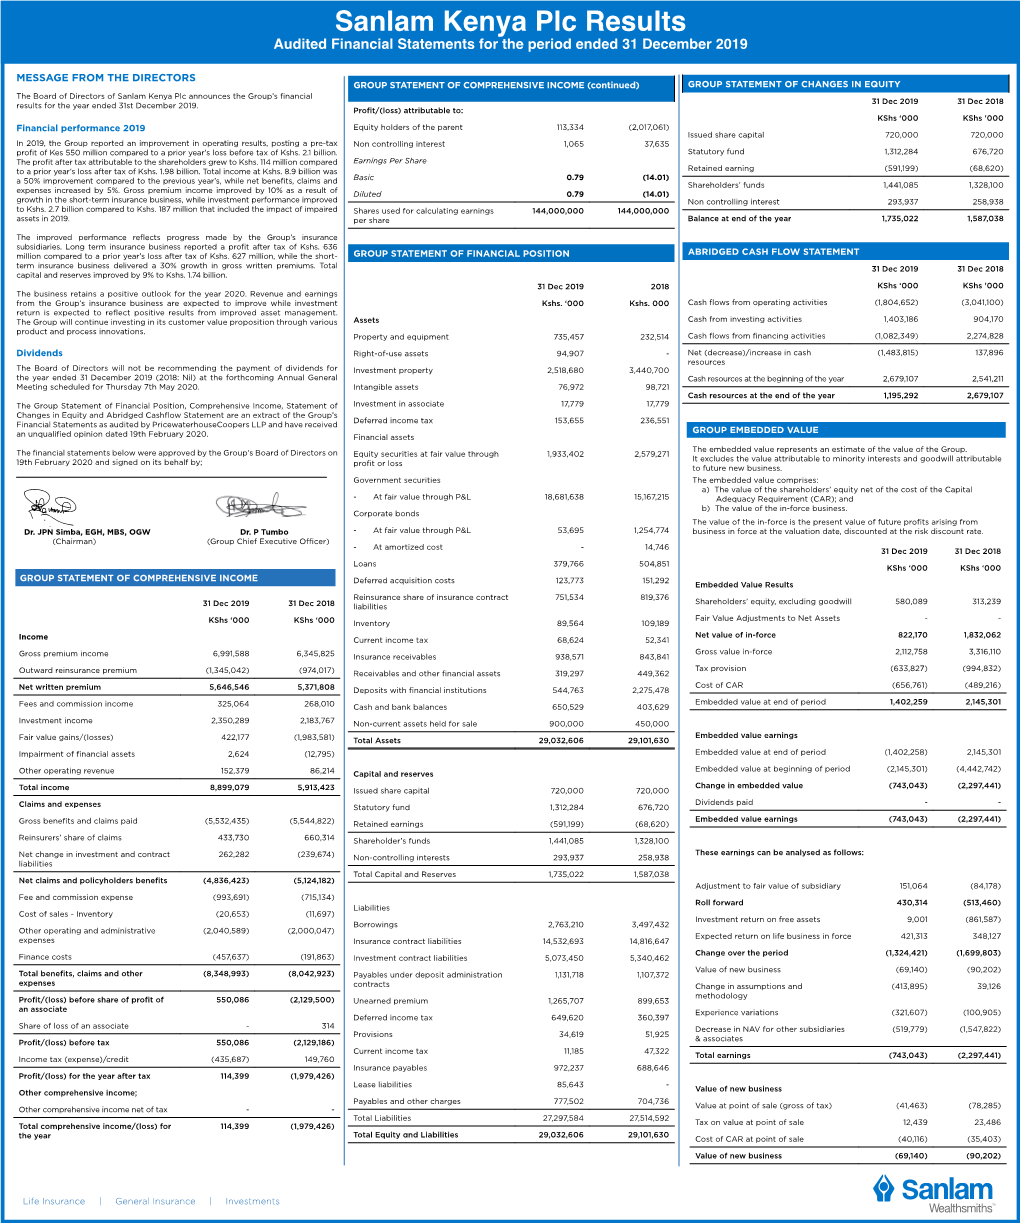 Sanlam Kenya Plc Results Audited Financial Statements for the Period Ended 31 December 2019